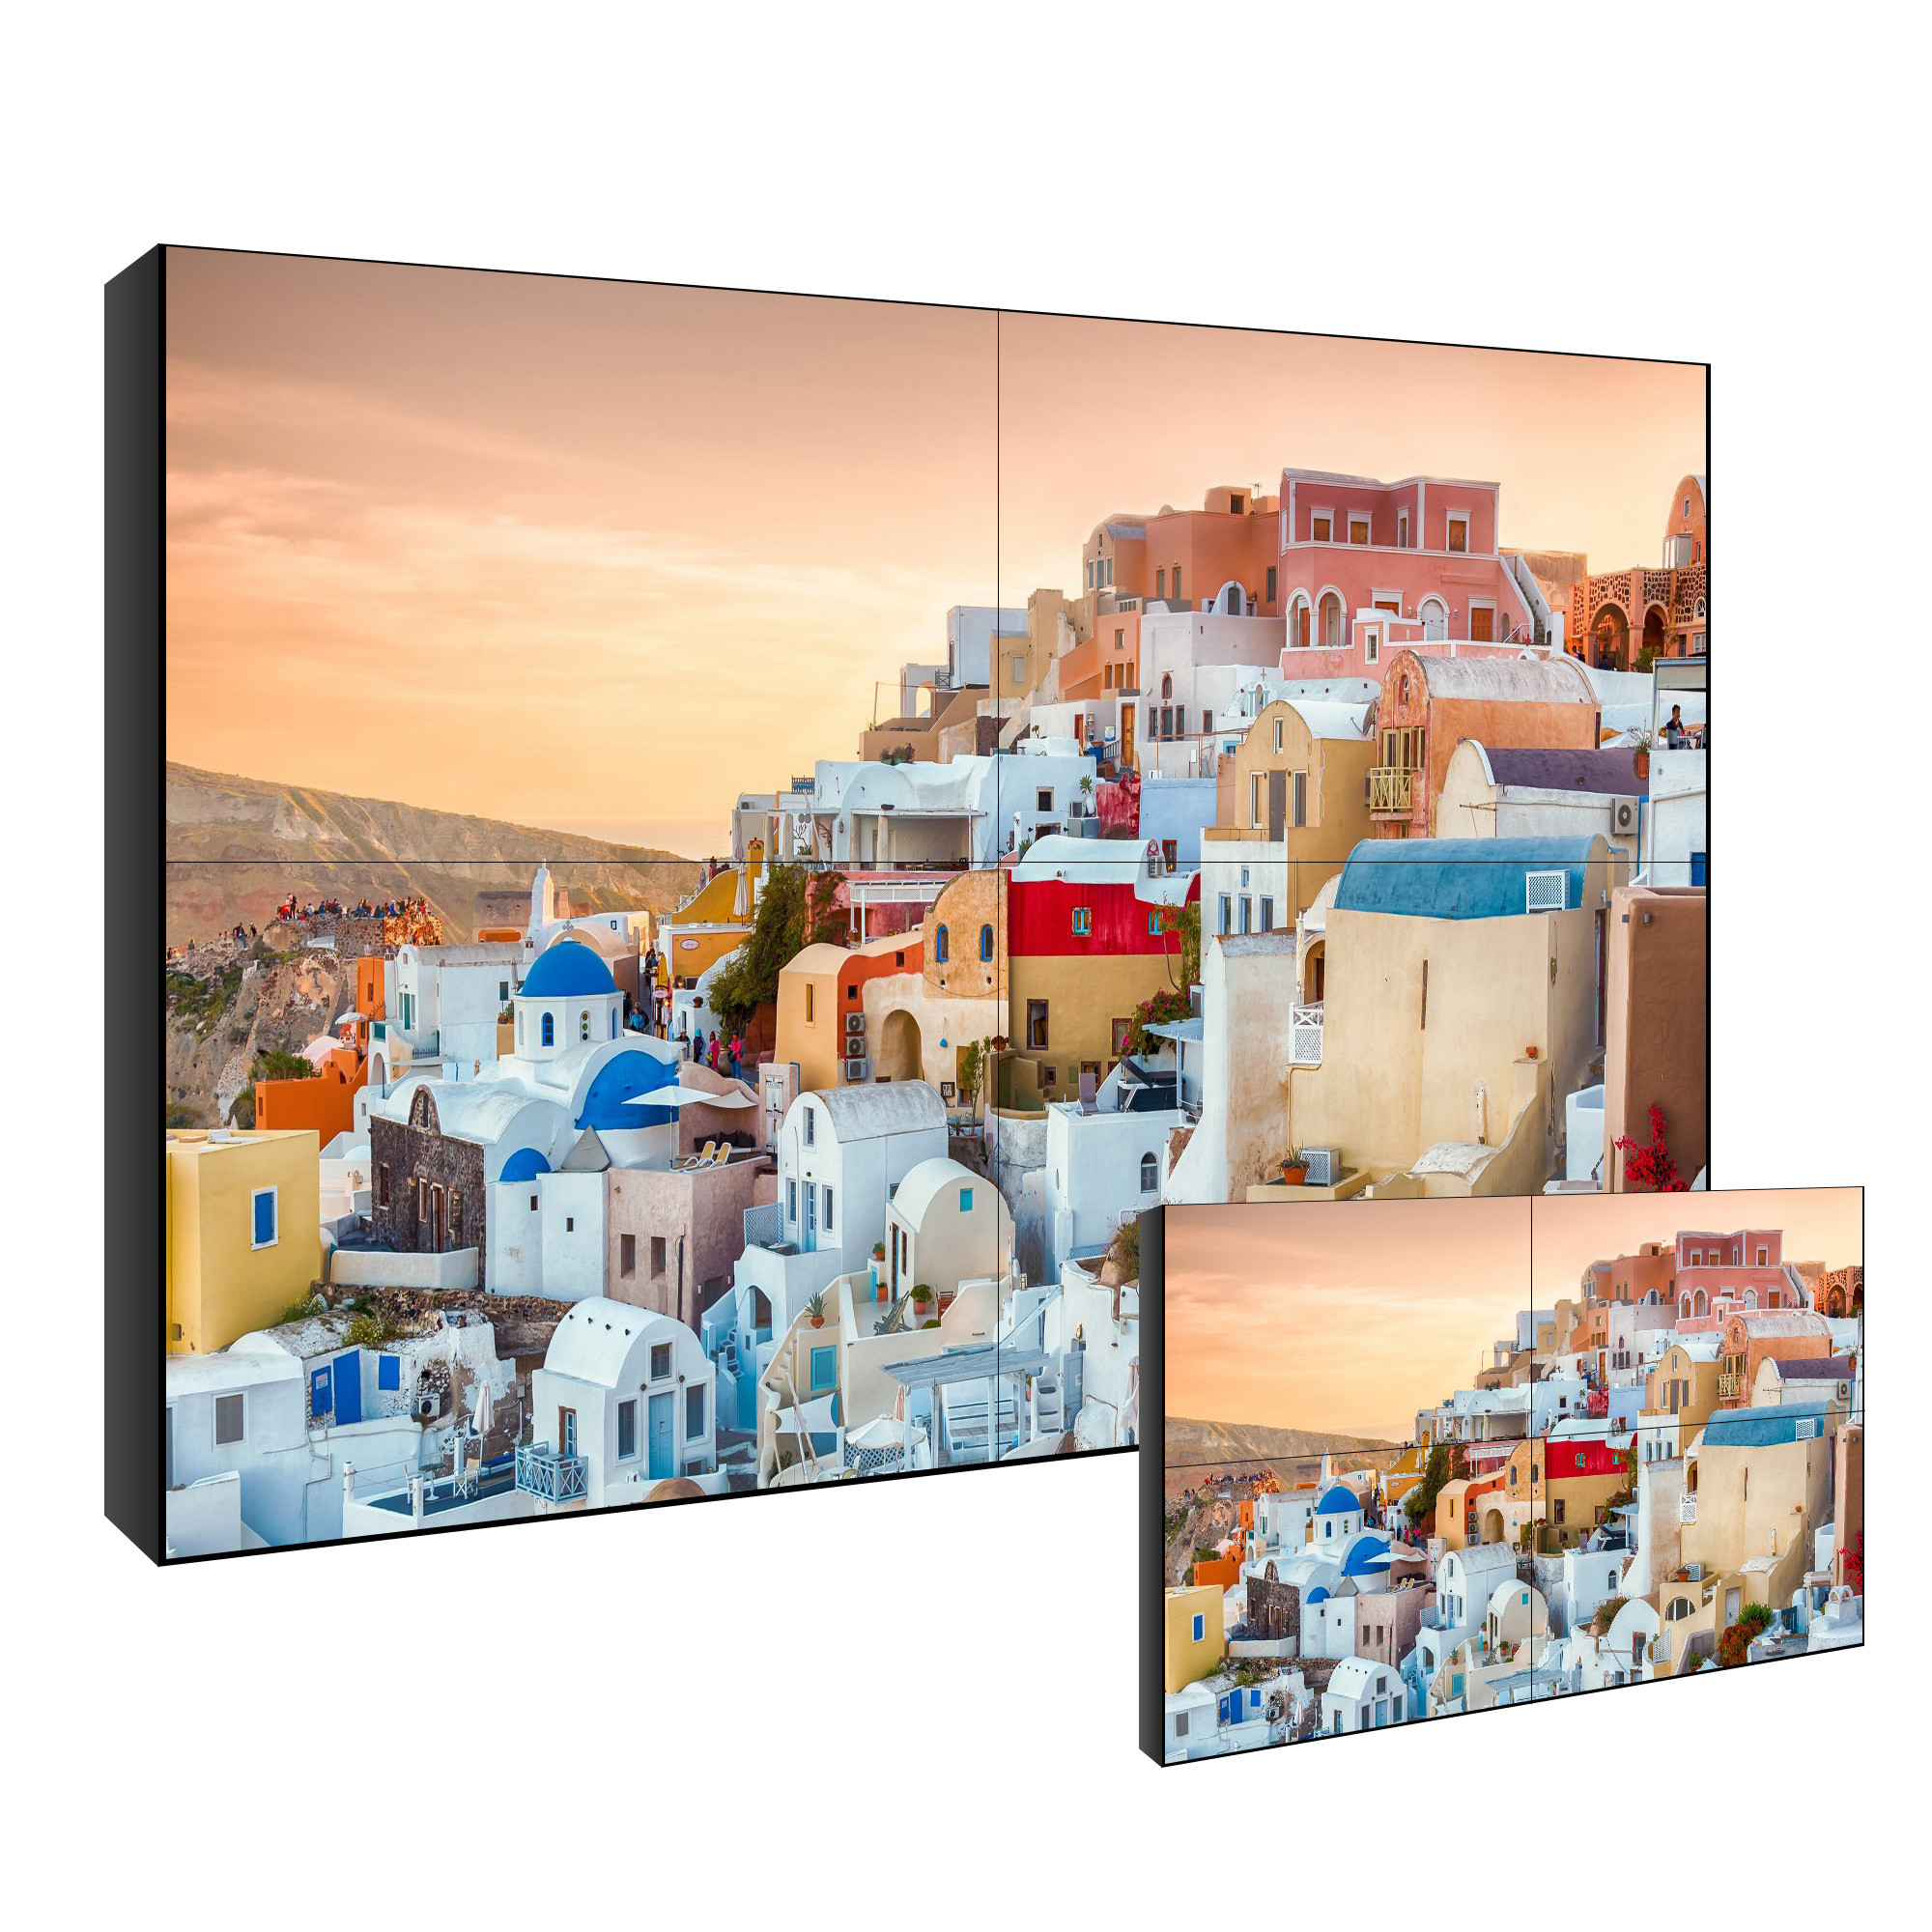 Wholesale FHD Stand LCD Video Wall Display 1920X1080 Resolution 110mm Thickness 55Inch from china suppliers